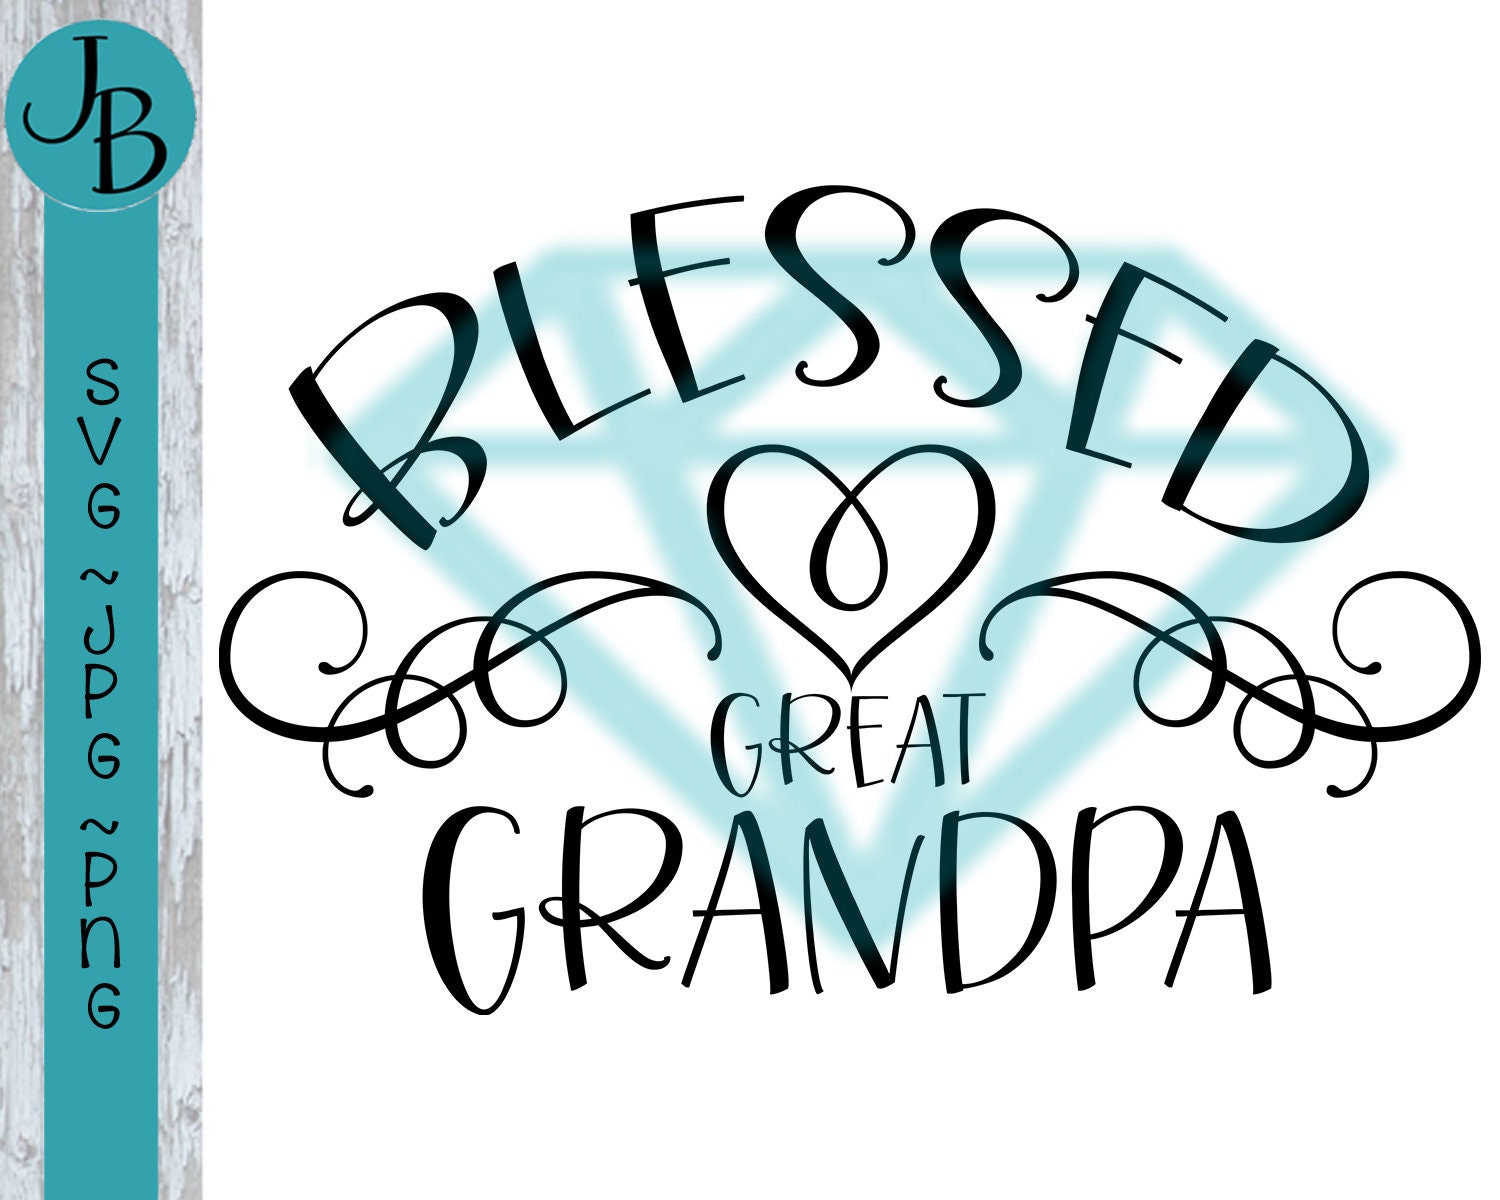 Download Blessed Great Grandpa SVG Cut File 0058 | Etsy